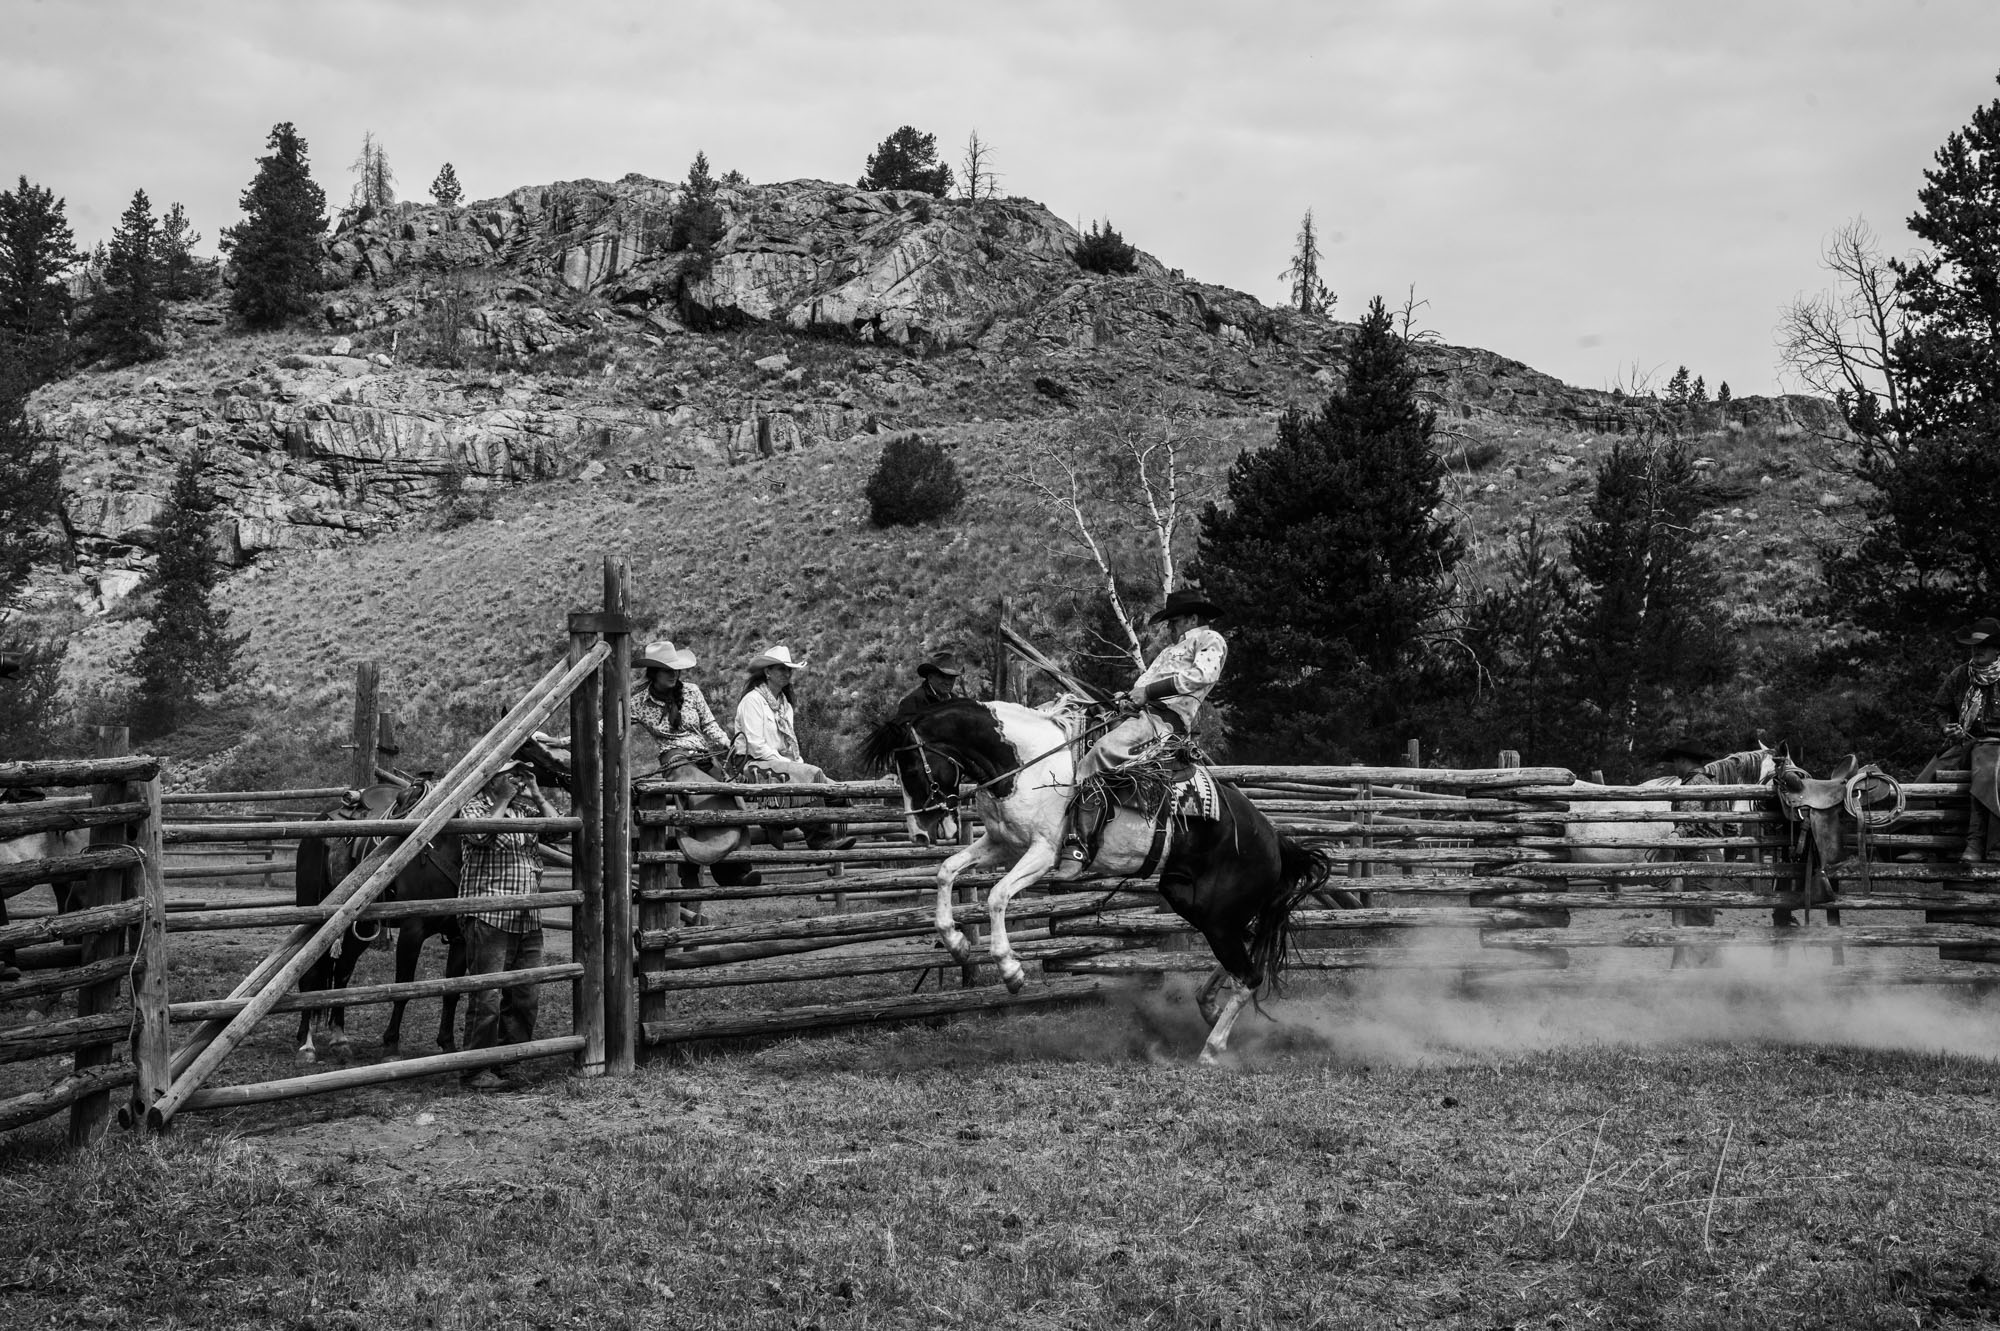 Fine Art Limited Edition Photo Prints of Cowboys, Horses, and life in the West. Rough out. A Cowboy picture in black and white...